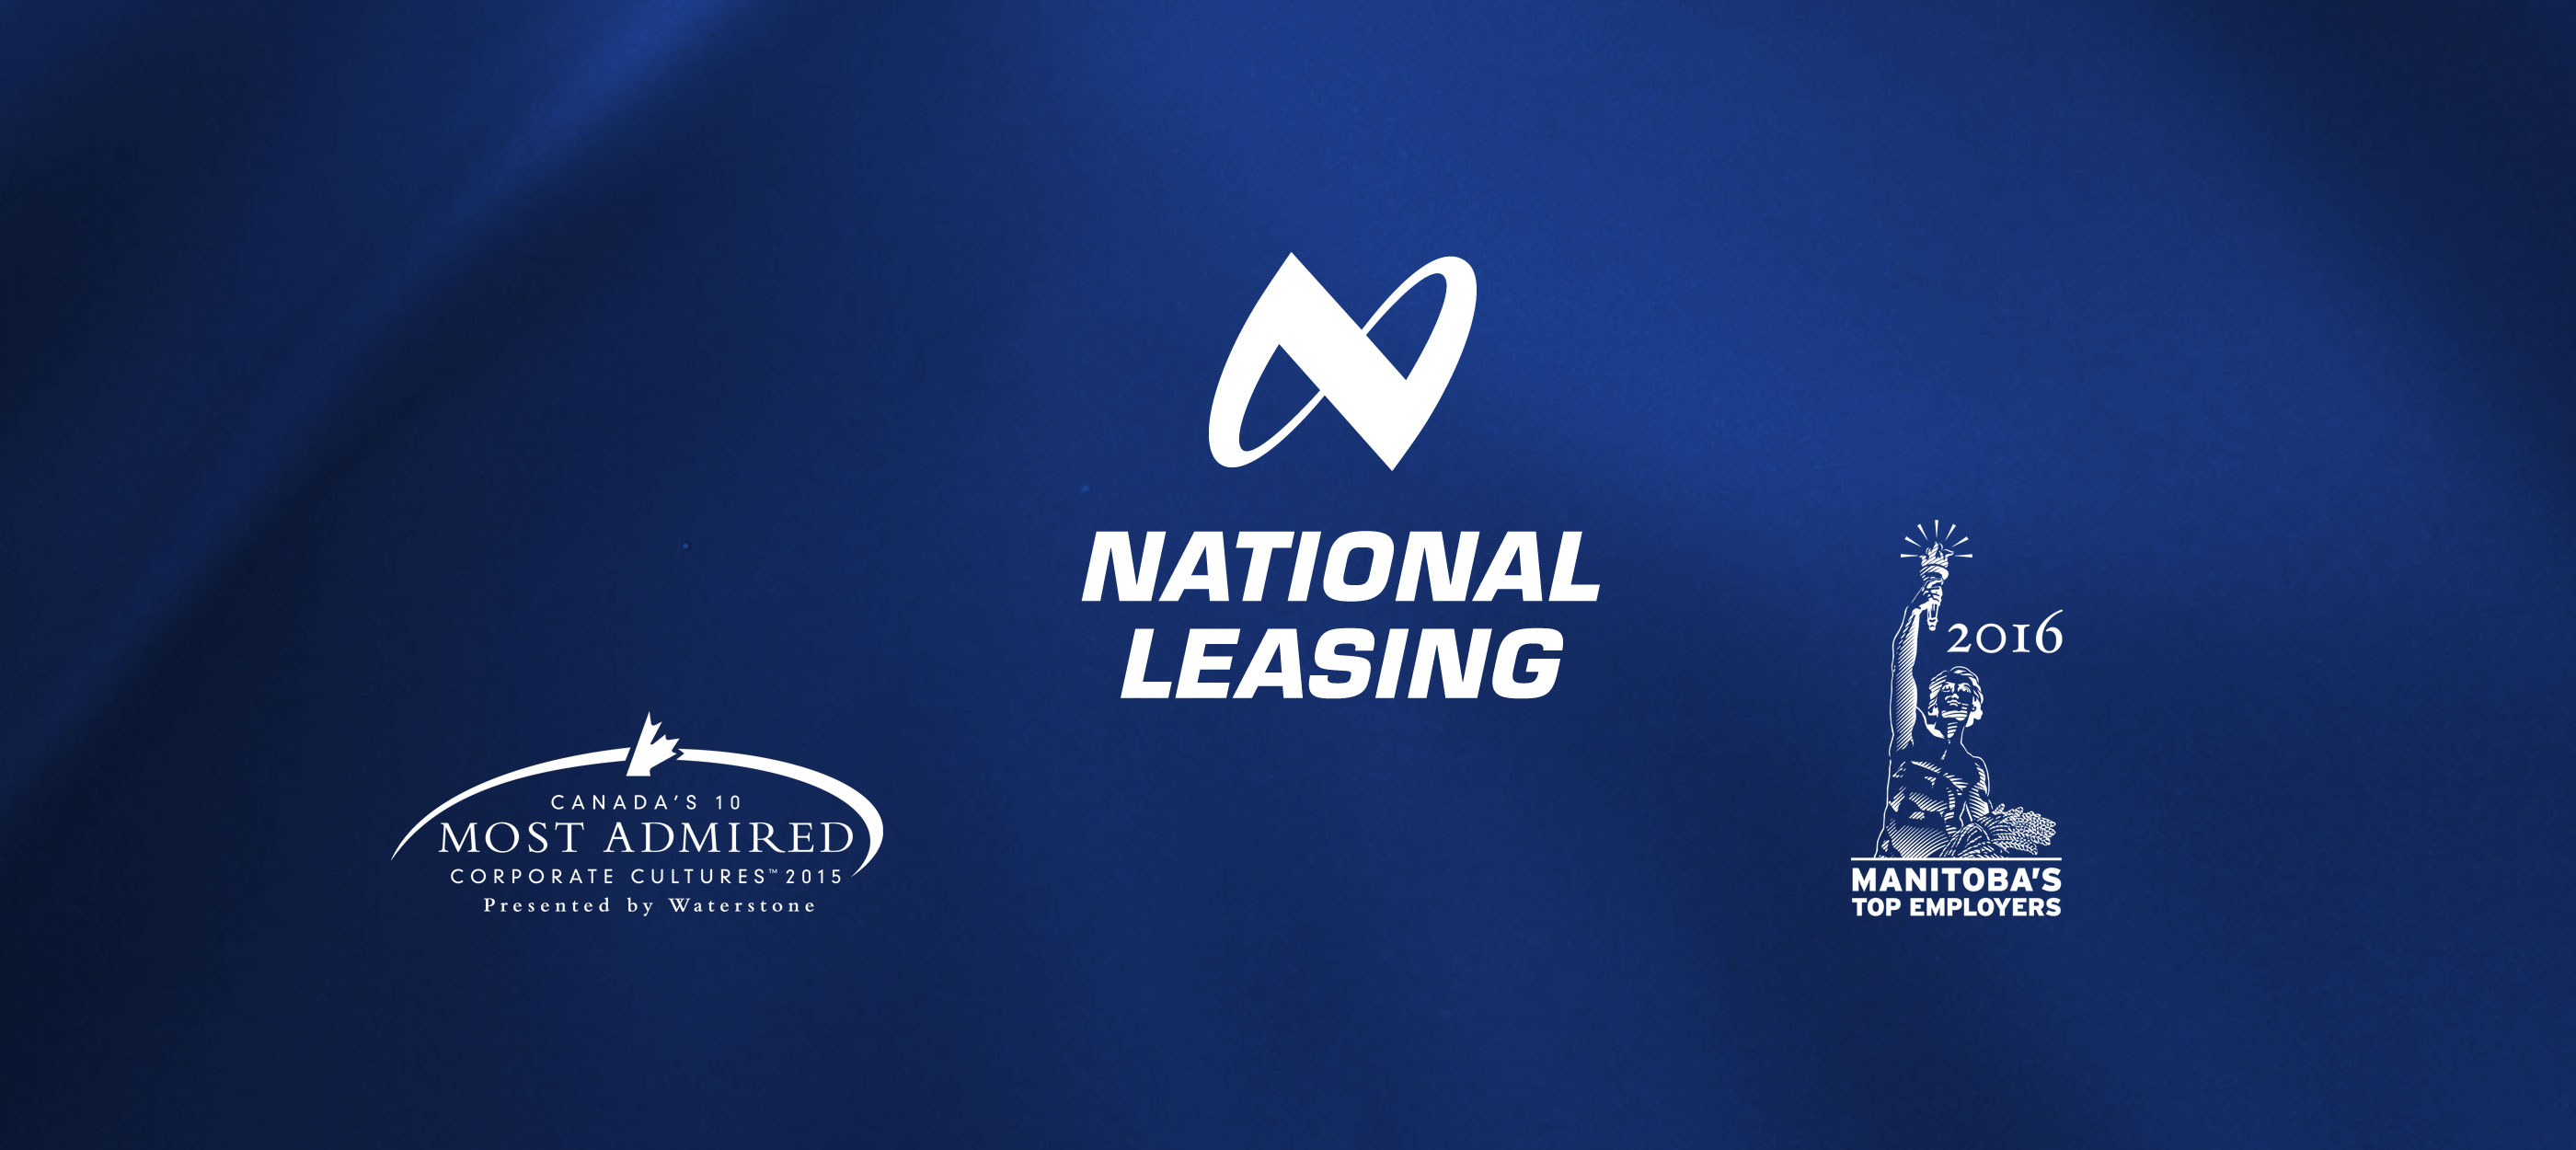 An image of the CWB National Leasing logo with the logos for the two awards the company won.